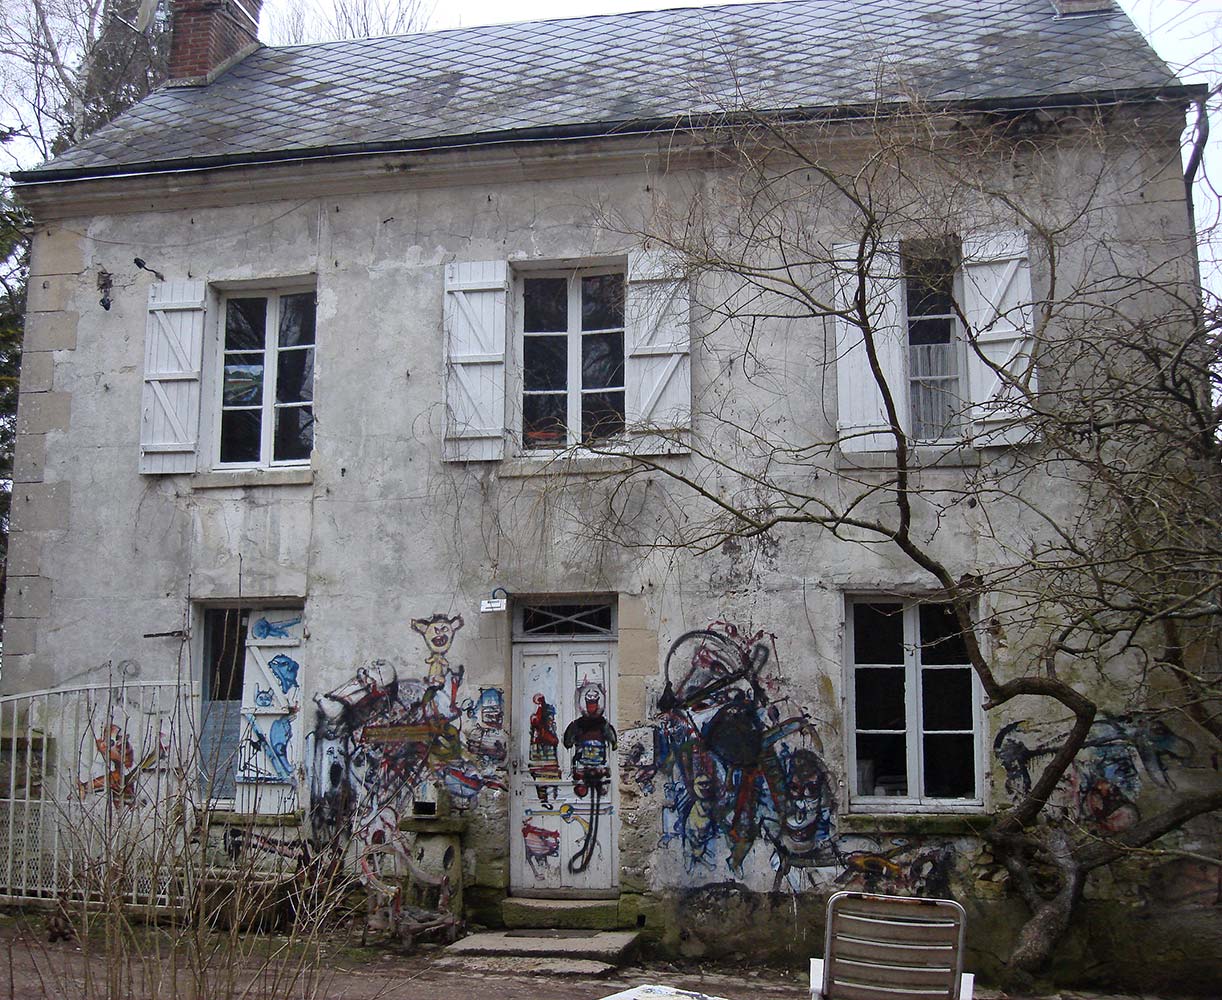 Entrance to the first building – Murals at Hérouval